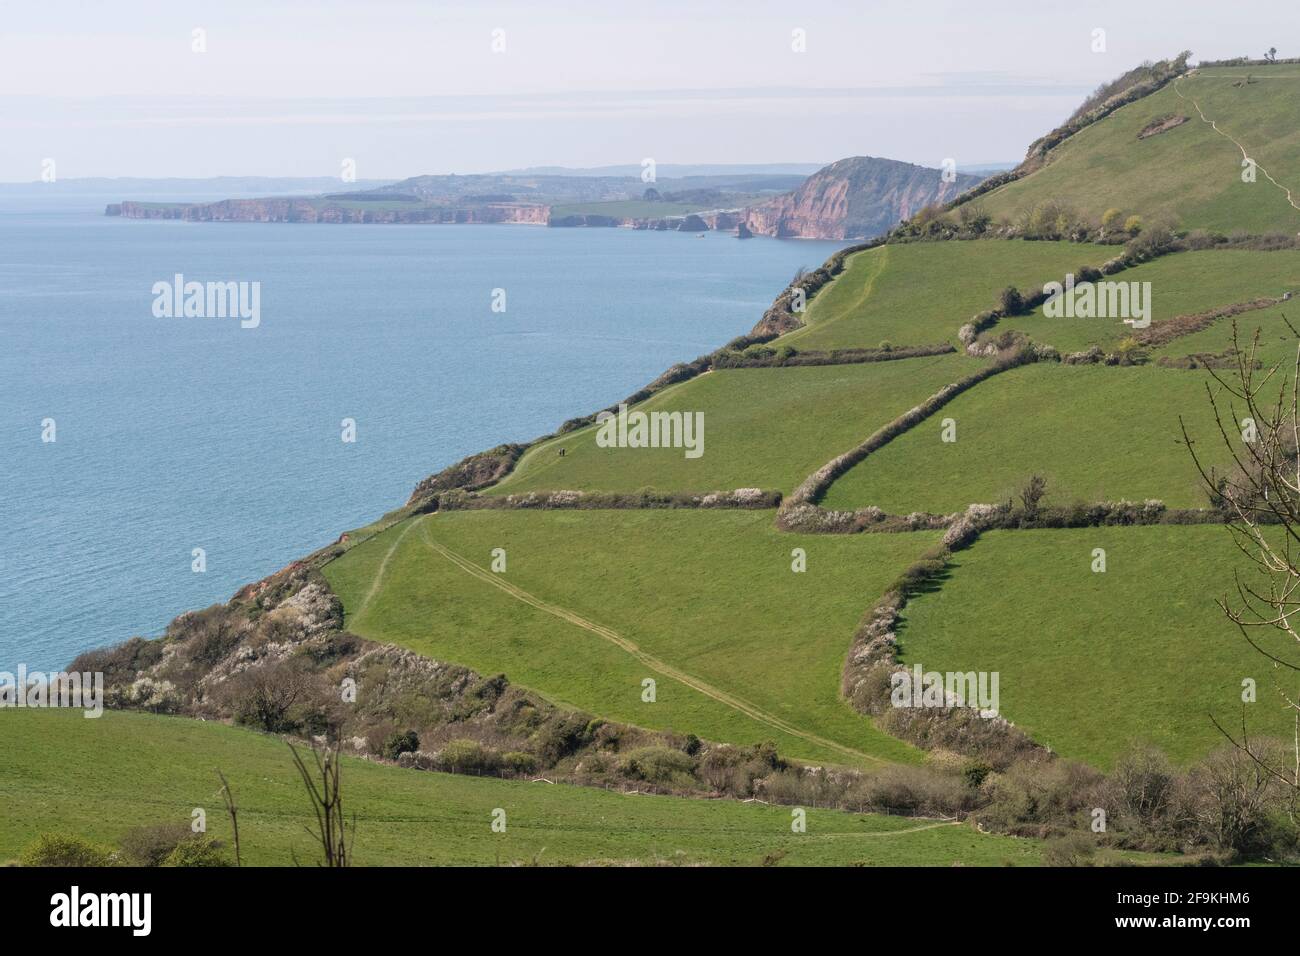 View from the South West Coastal path walking route across fields down to Salcombe Mouth, near Sidmouth, Devon. Stock Photo